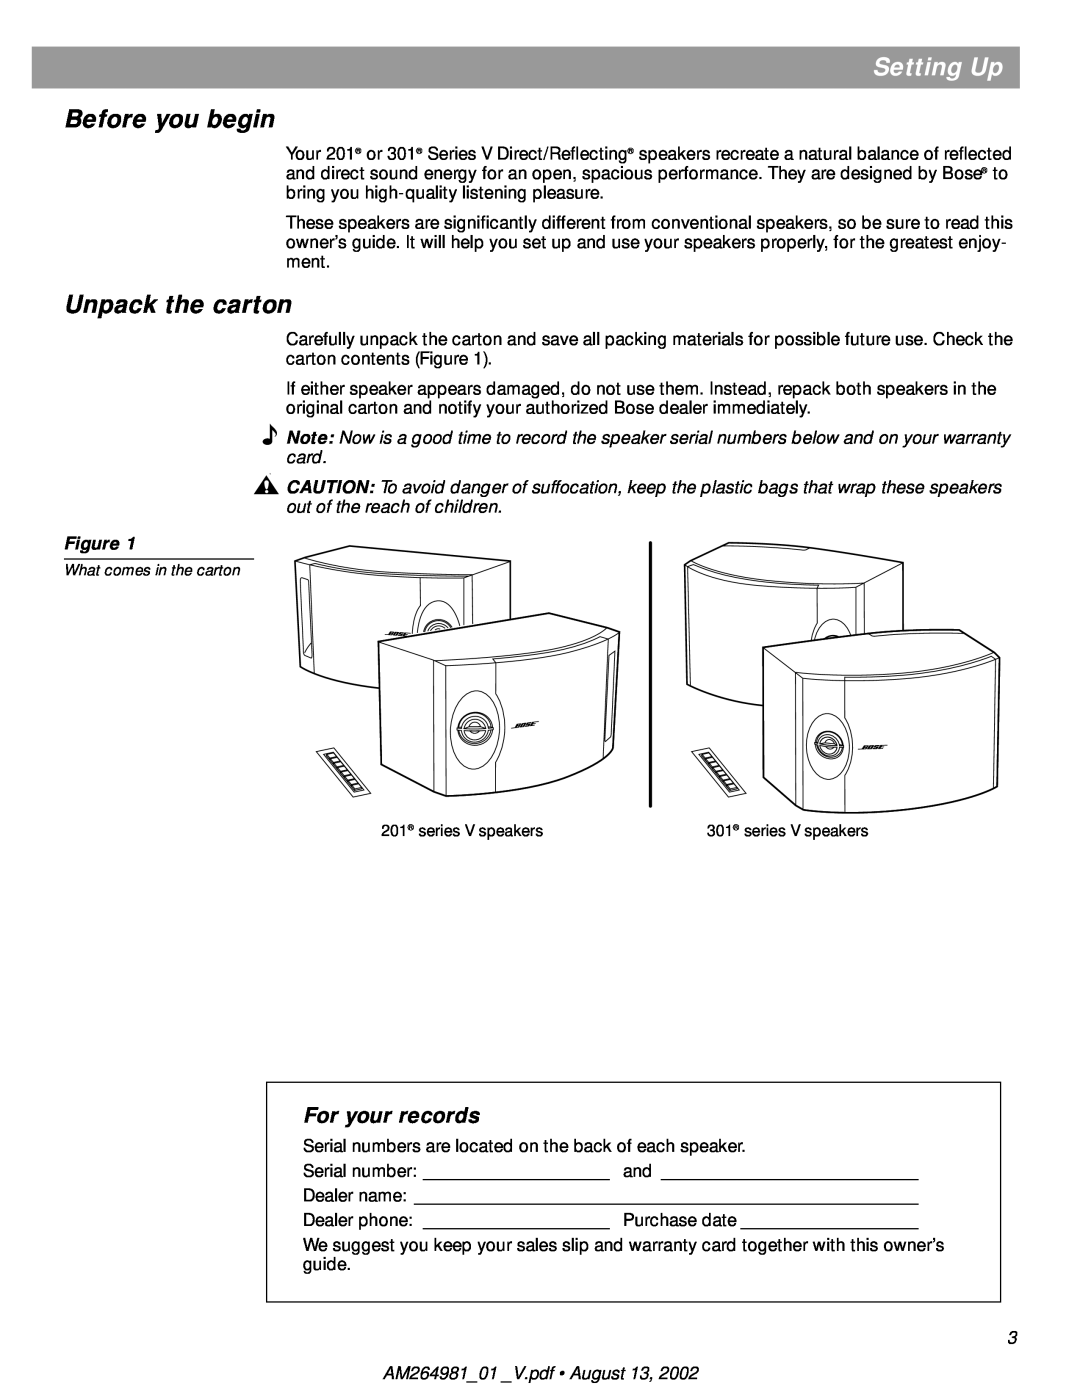 Bose 201, 301 manual Setting Up, Before you begin, Unpack the carton, For your records 